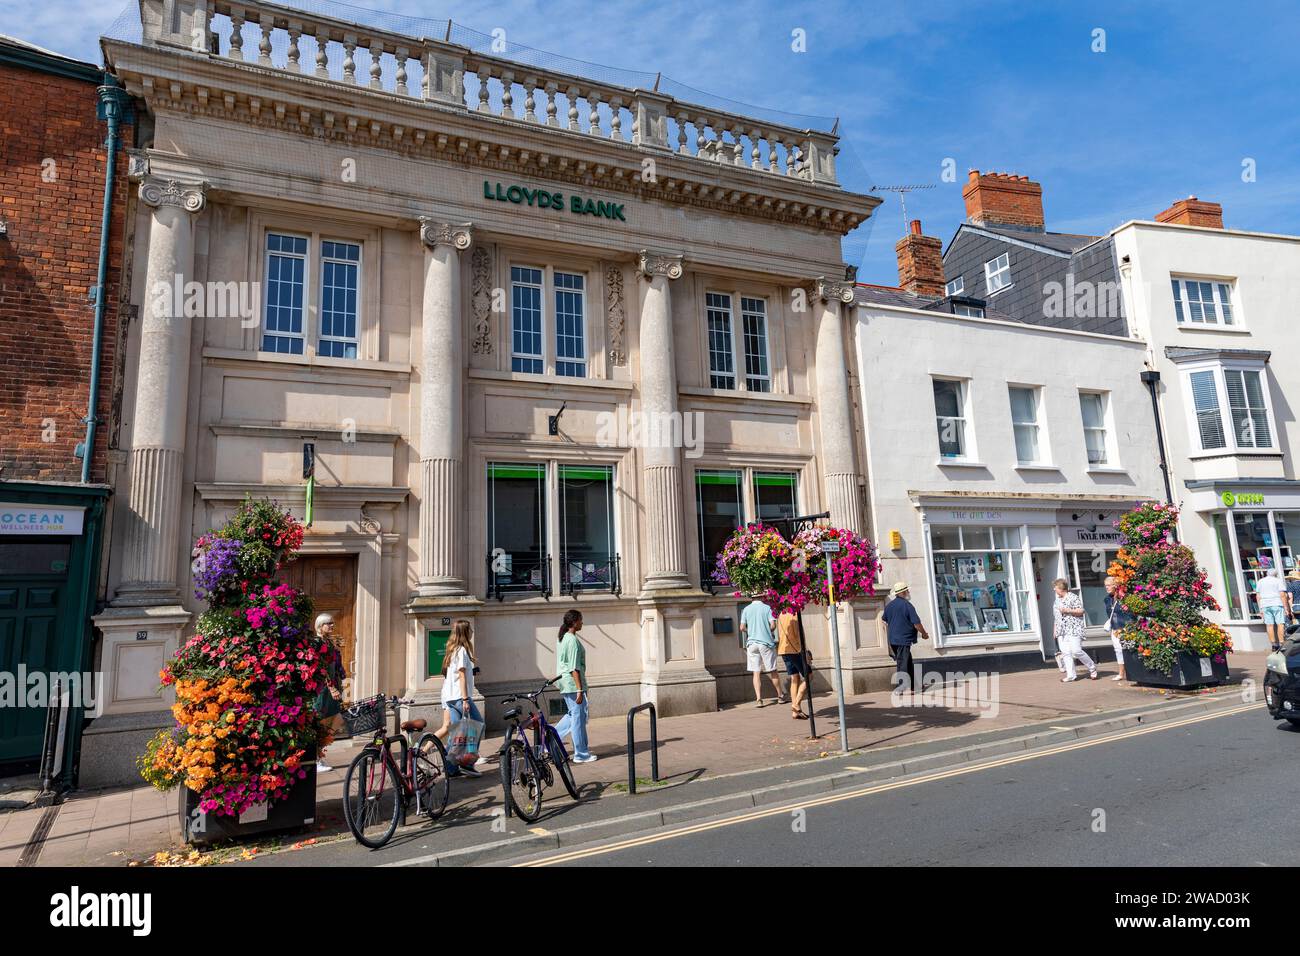 Lloyds bank, branch of Lloyds bank on the high street in Sidmouth,Devon,England, sunny autumn day with flowering hanging baskets,England,2023 Stock Photo